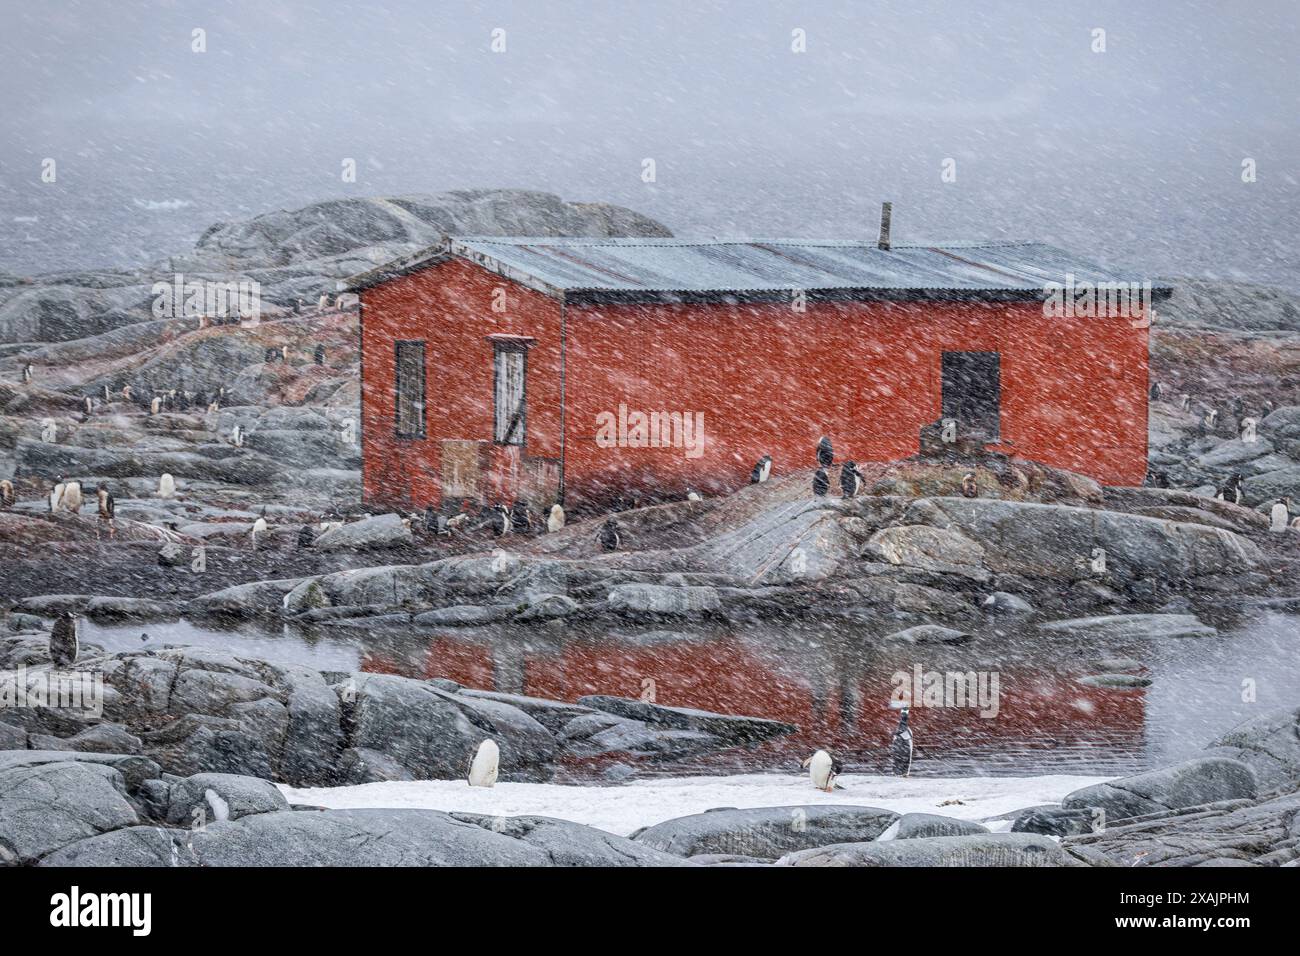 Former British research station surrounded by gentoo penguins, Petermann Island, Antarctica Stock Photo